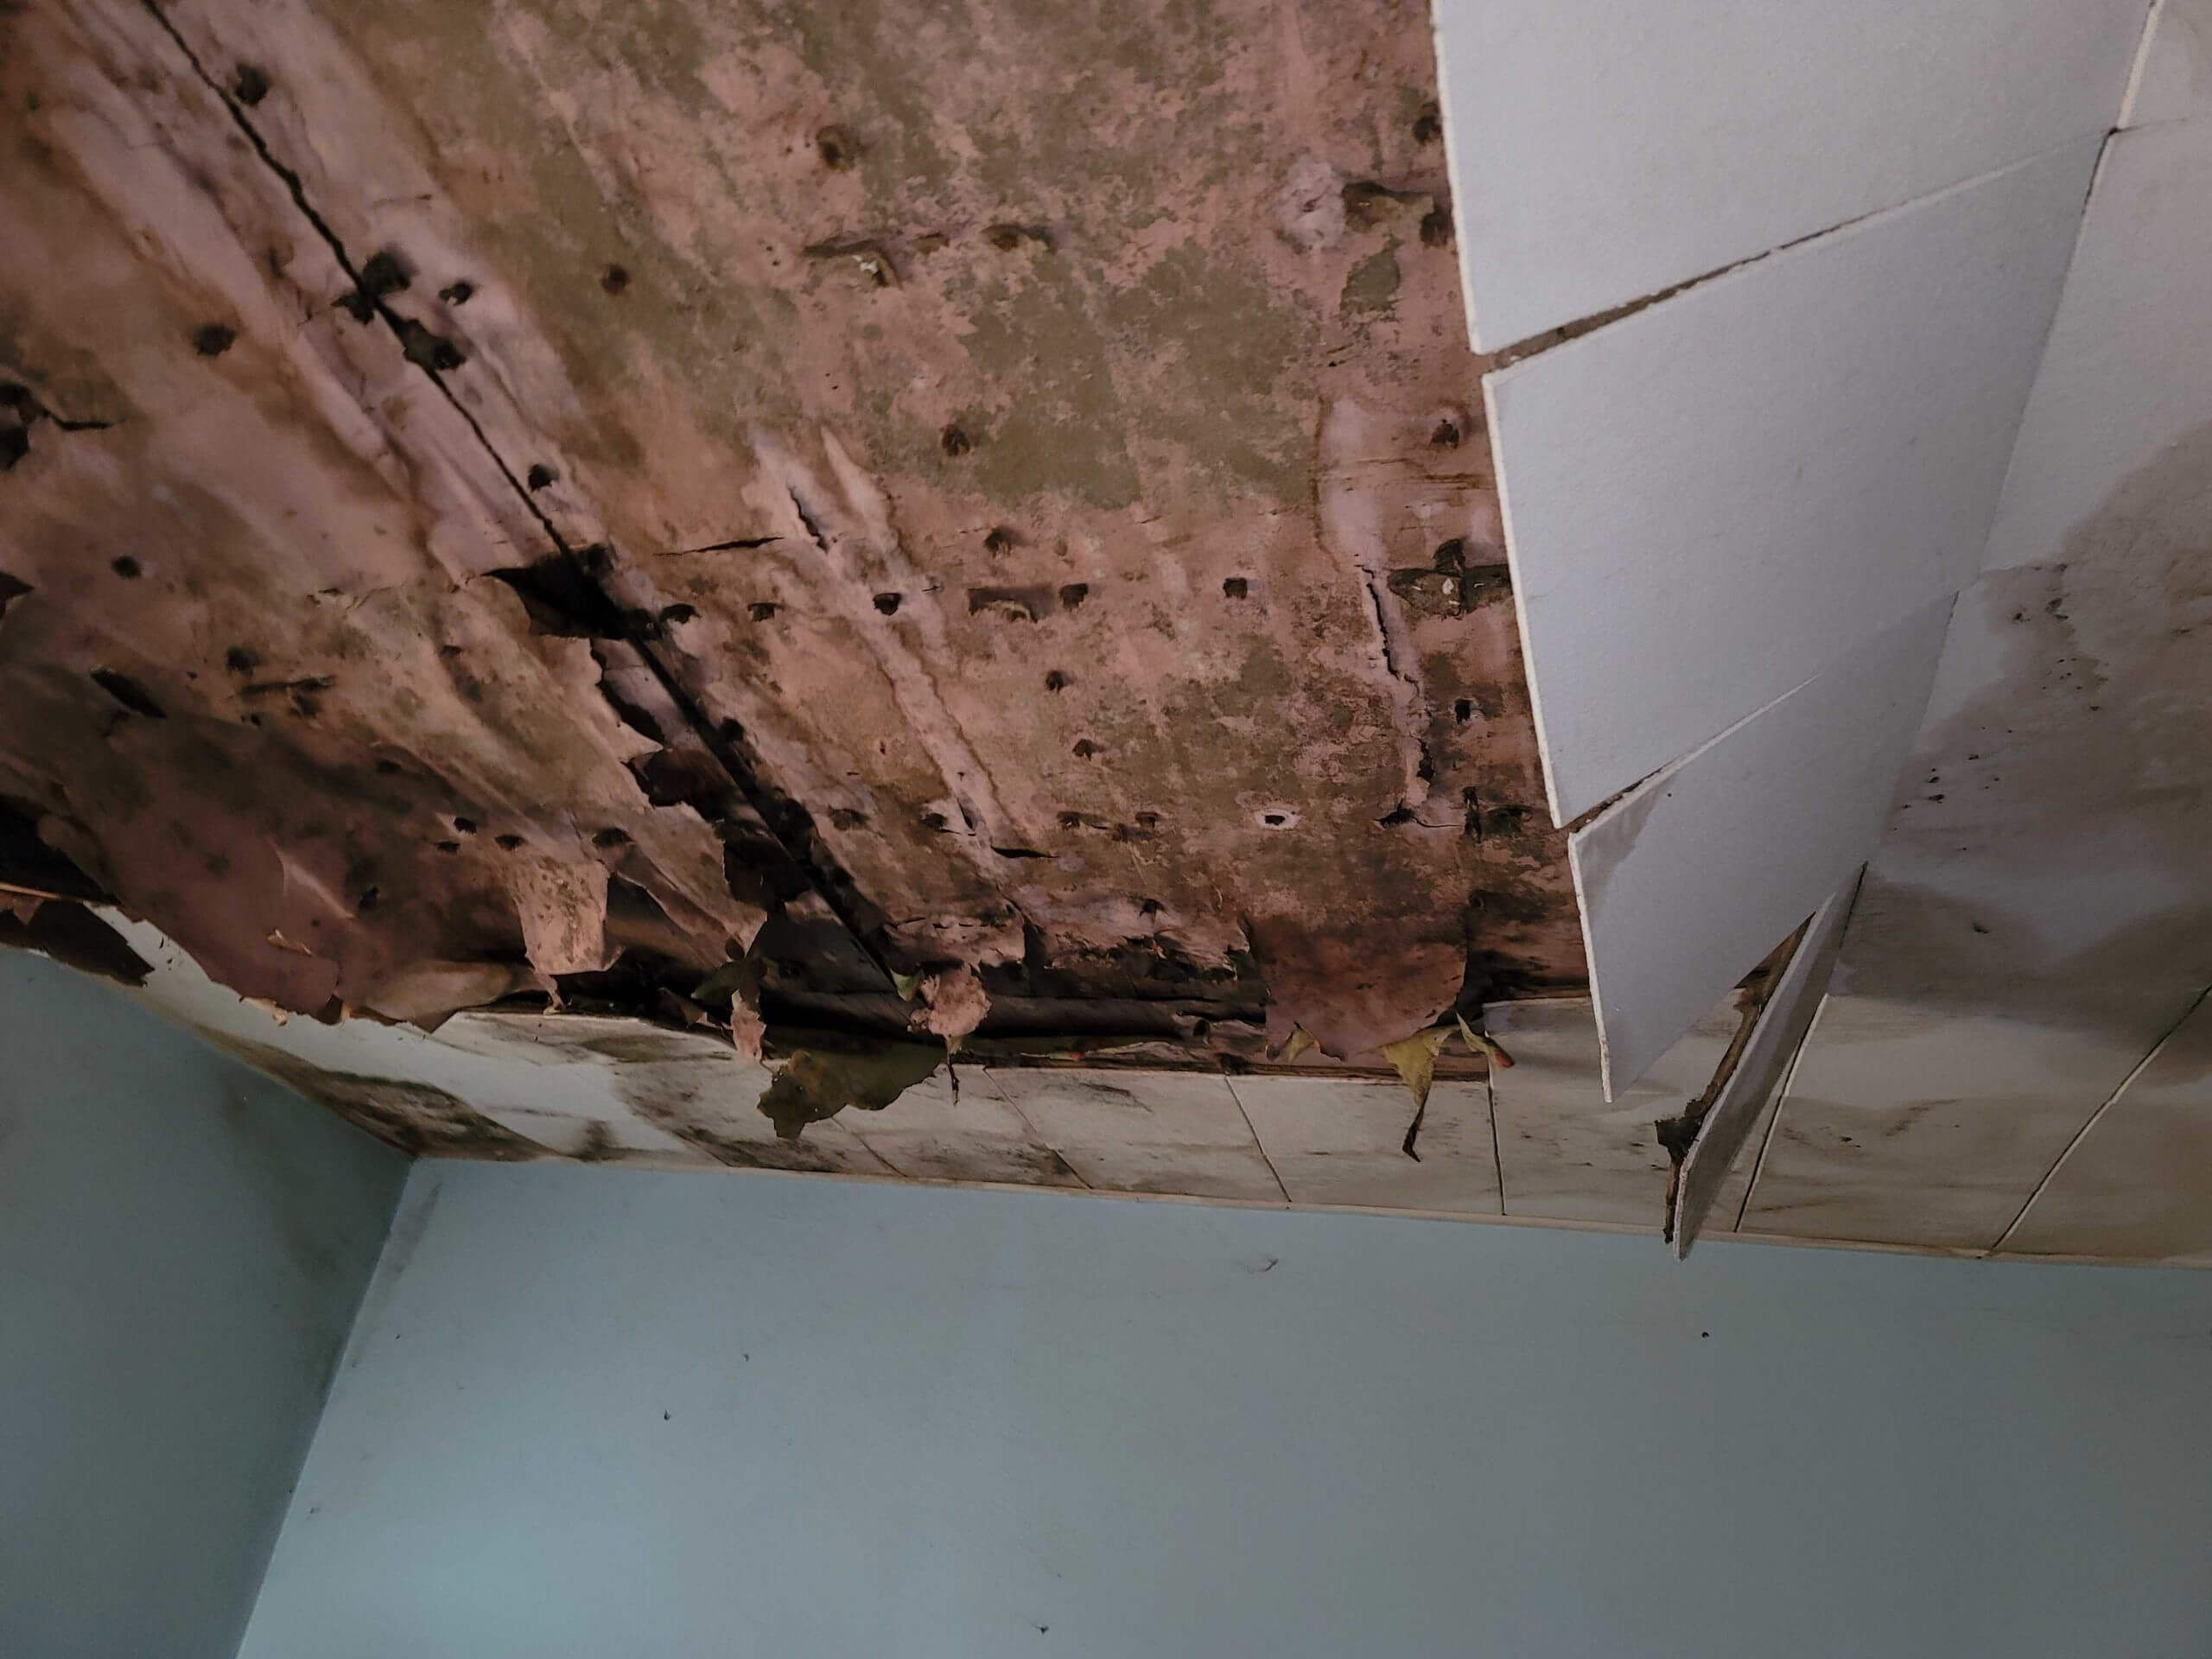 Severe water damage and mold on the ceiling. The ceiling is starting to collapse.